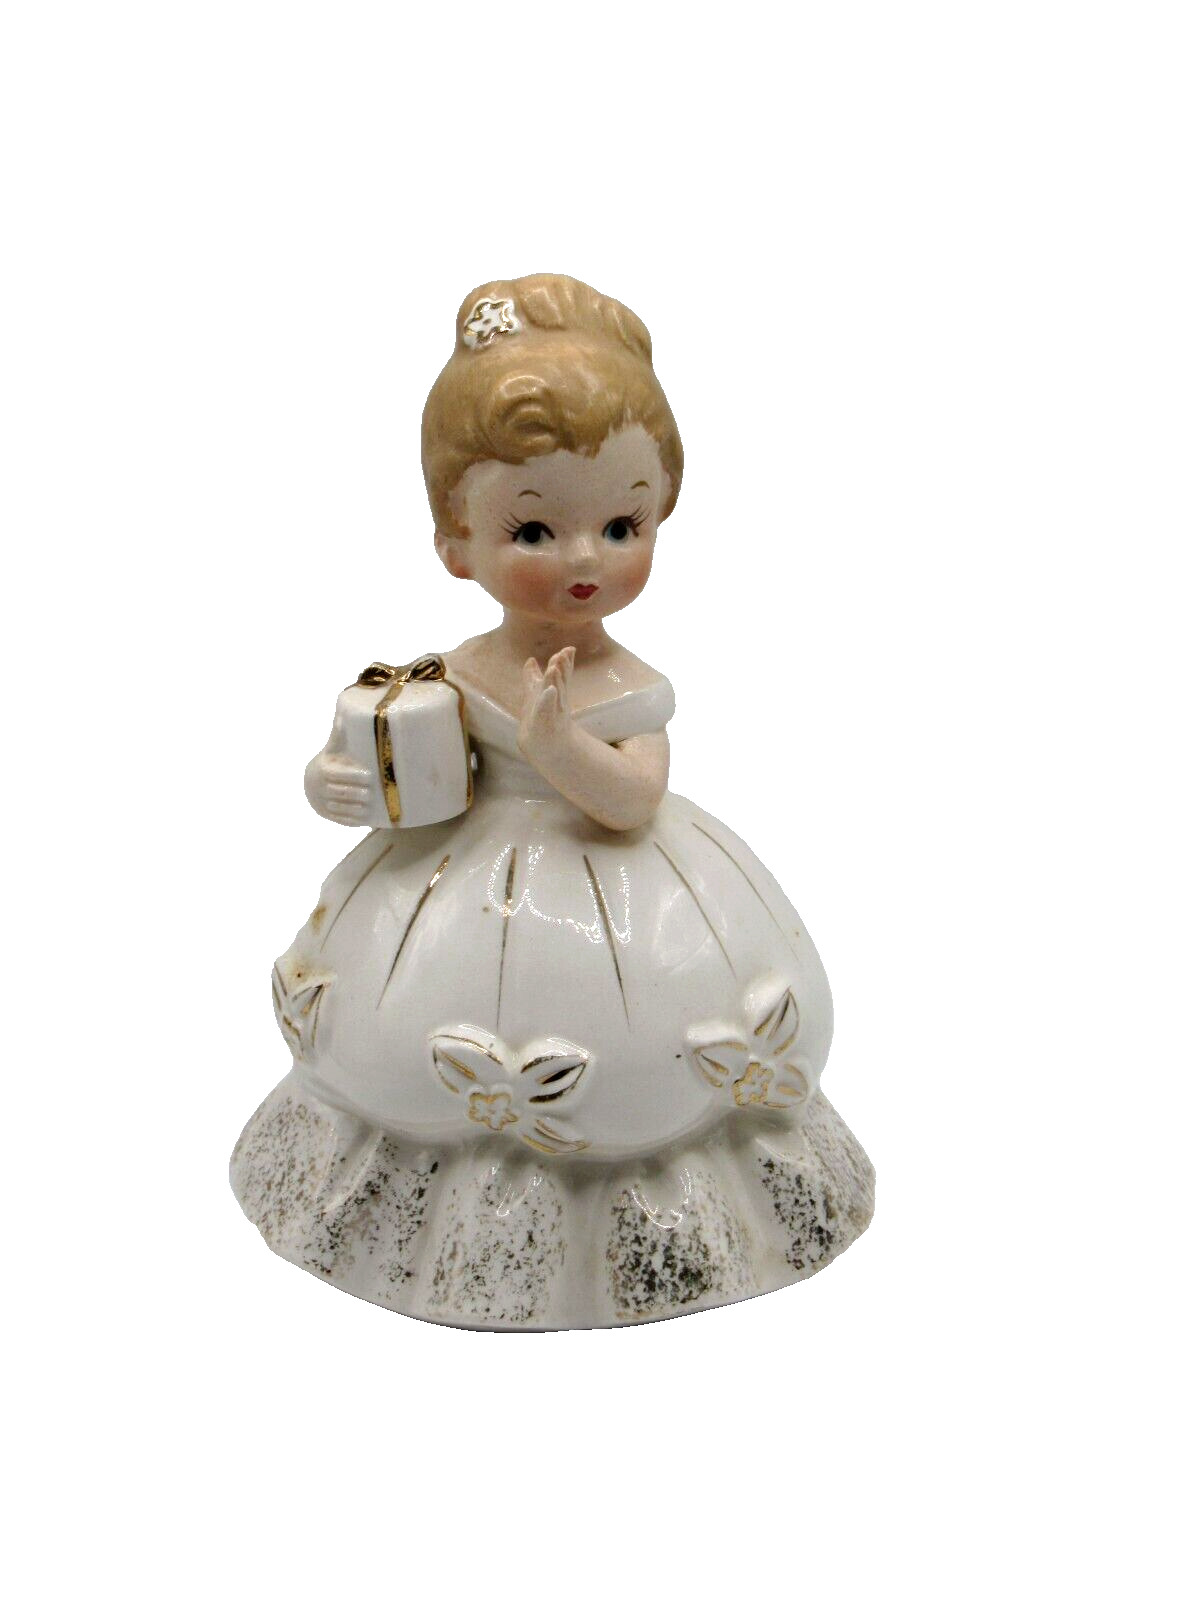 Vintage Figurine - Girl in White Dress w/ Gift Box -Gold Trim (Made in Japan)